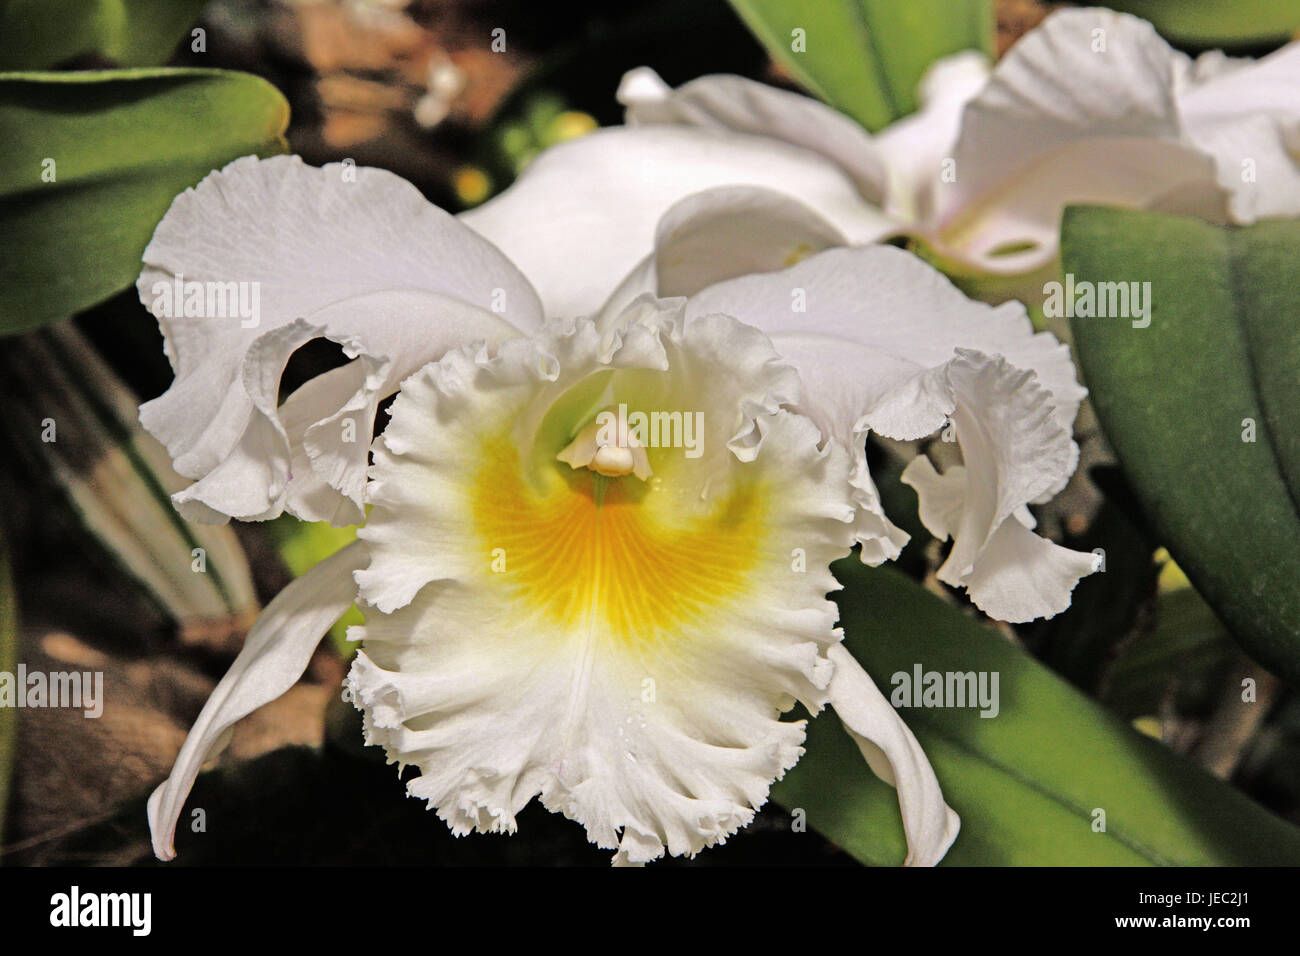 Orchid, medium close-up, Cattleya, Mainau, Lake of Constance, spring, blossom, white, orchid exhibit, orchid genus, Germany, Baden-Wurttemberg, Stock Photo